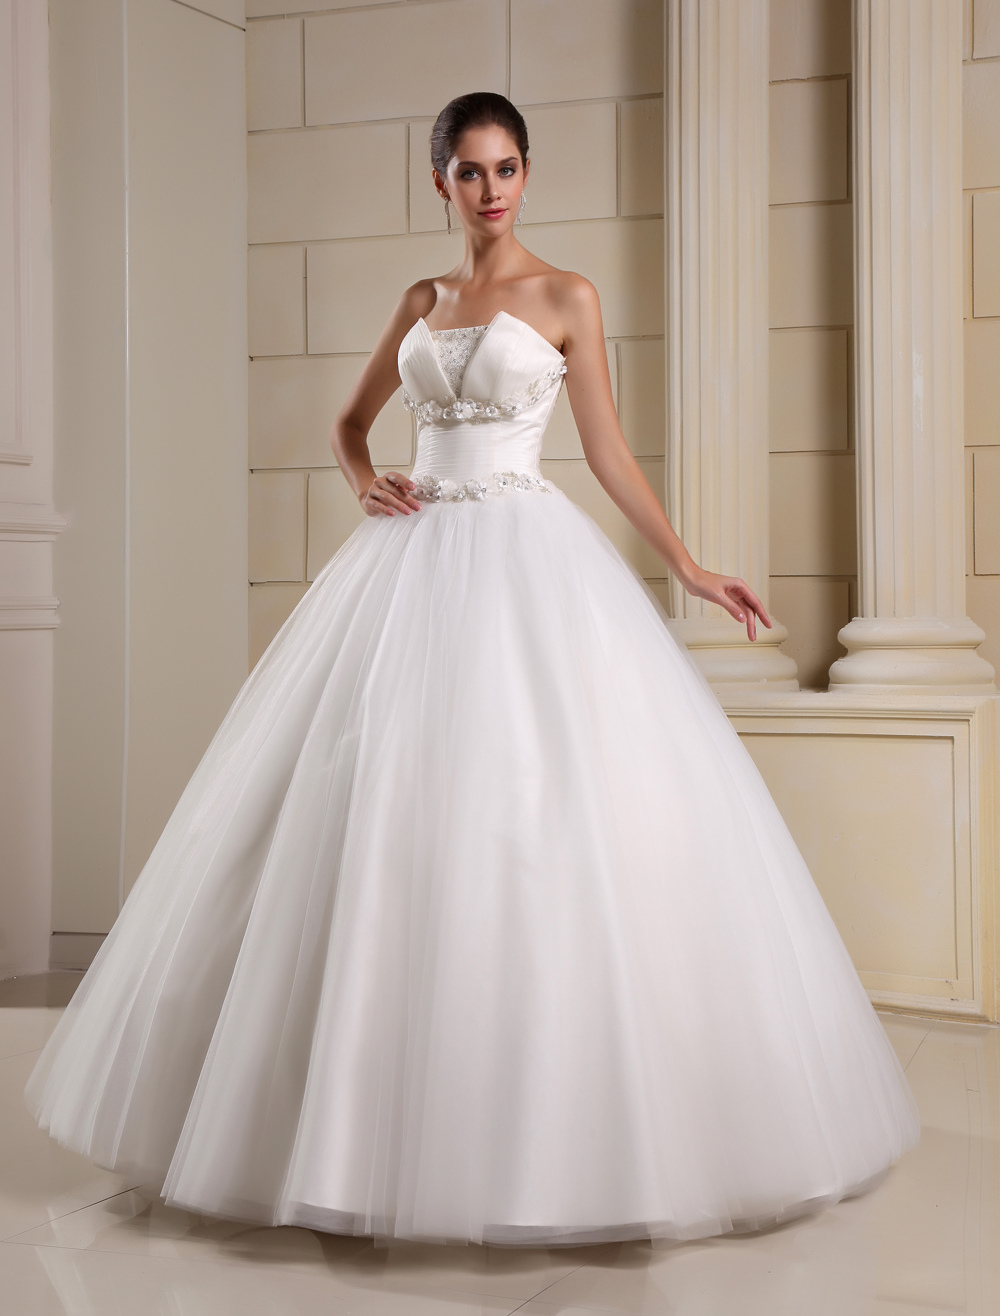 Ivory A-Line Strapless Beading Floral Tulle Bridal Wedding Gown ...